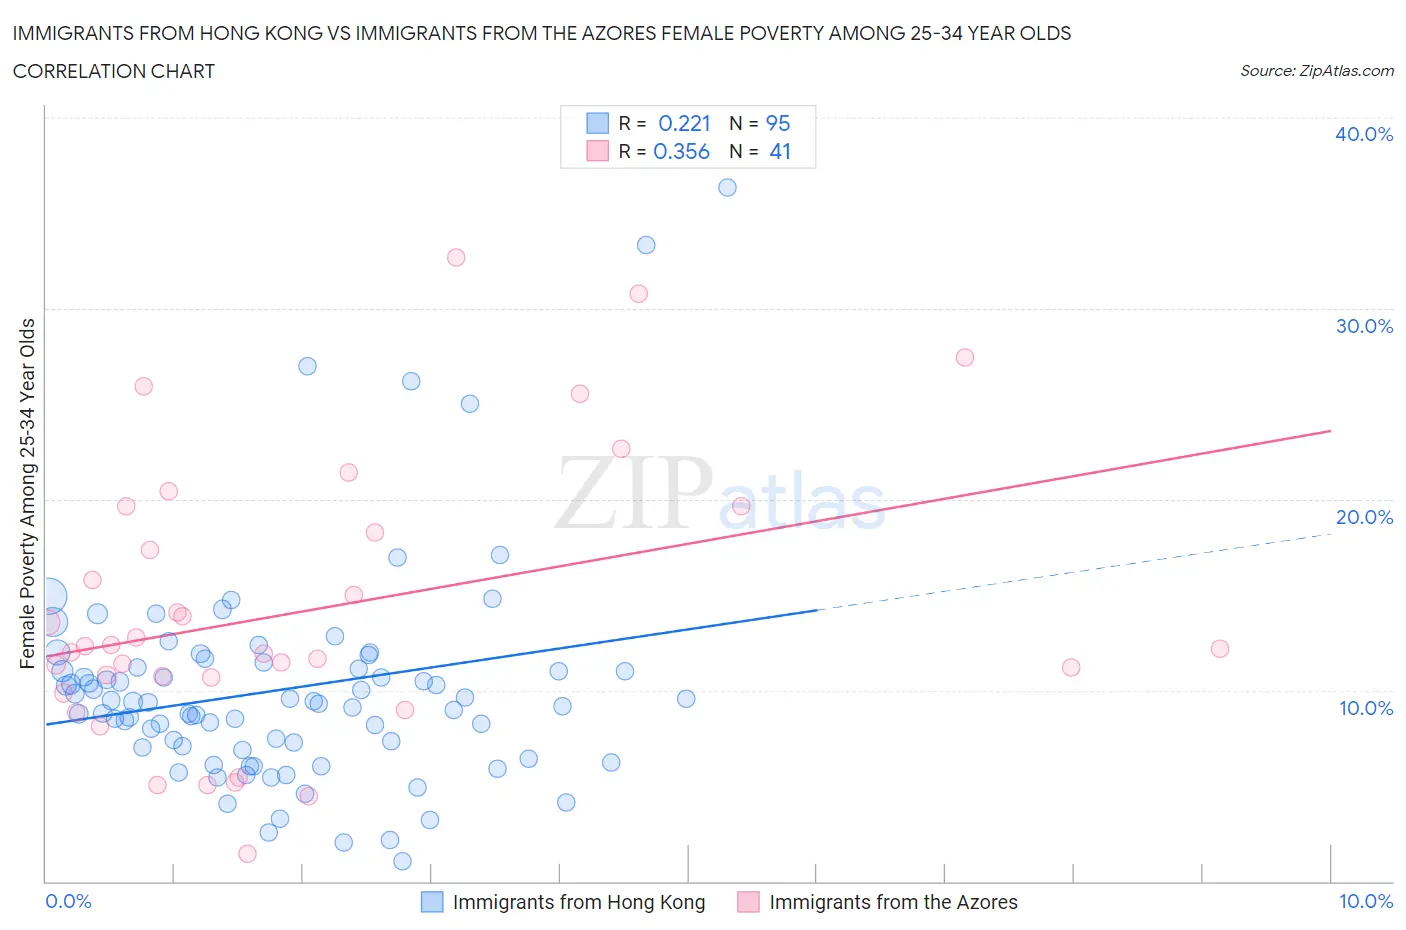 Immigrants from Hong Kong vs Immigrants from the Azores Female Poverty Among 25-34 Year Olds